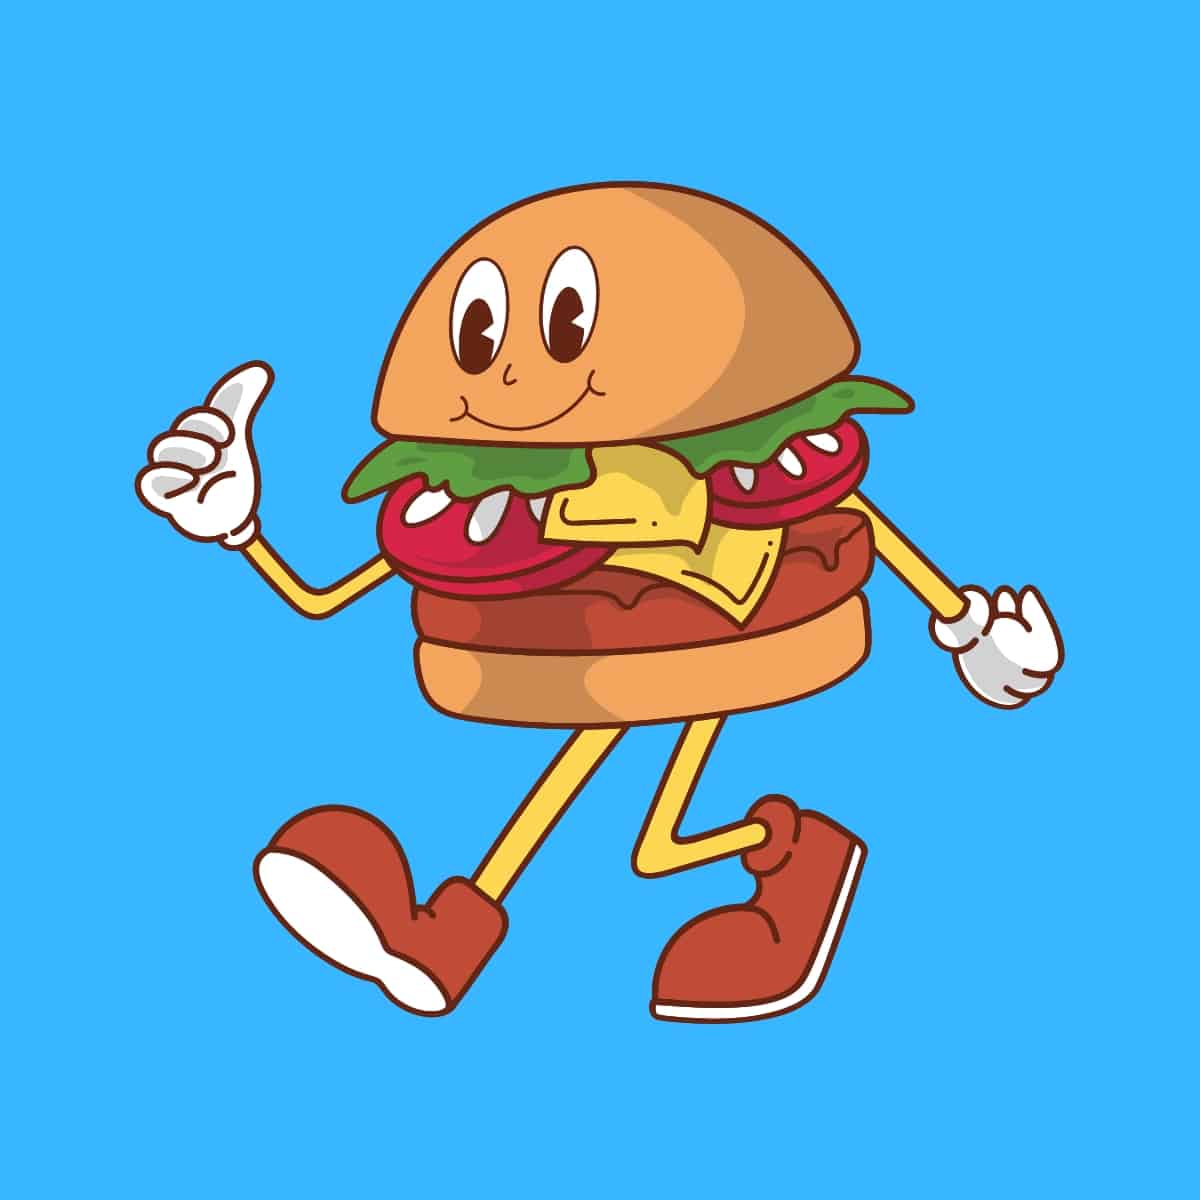 Cartoon graphic of a burger walking and smiling on a blue background.